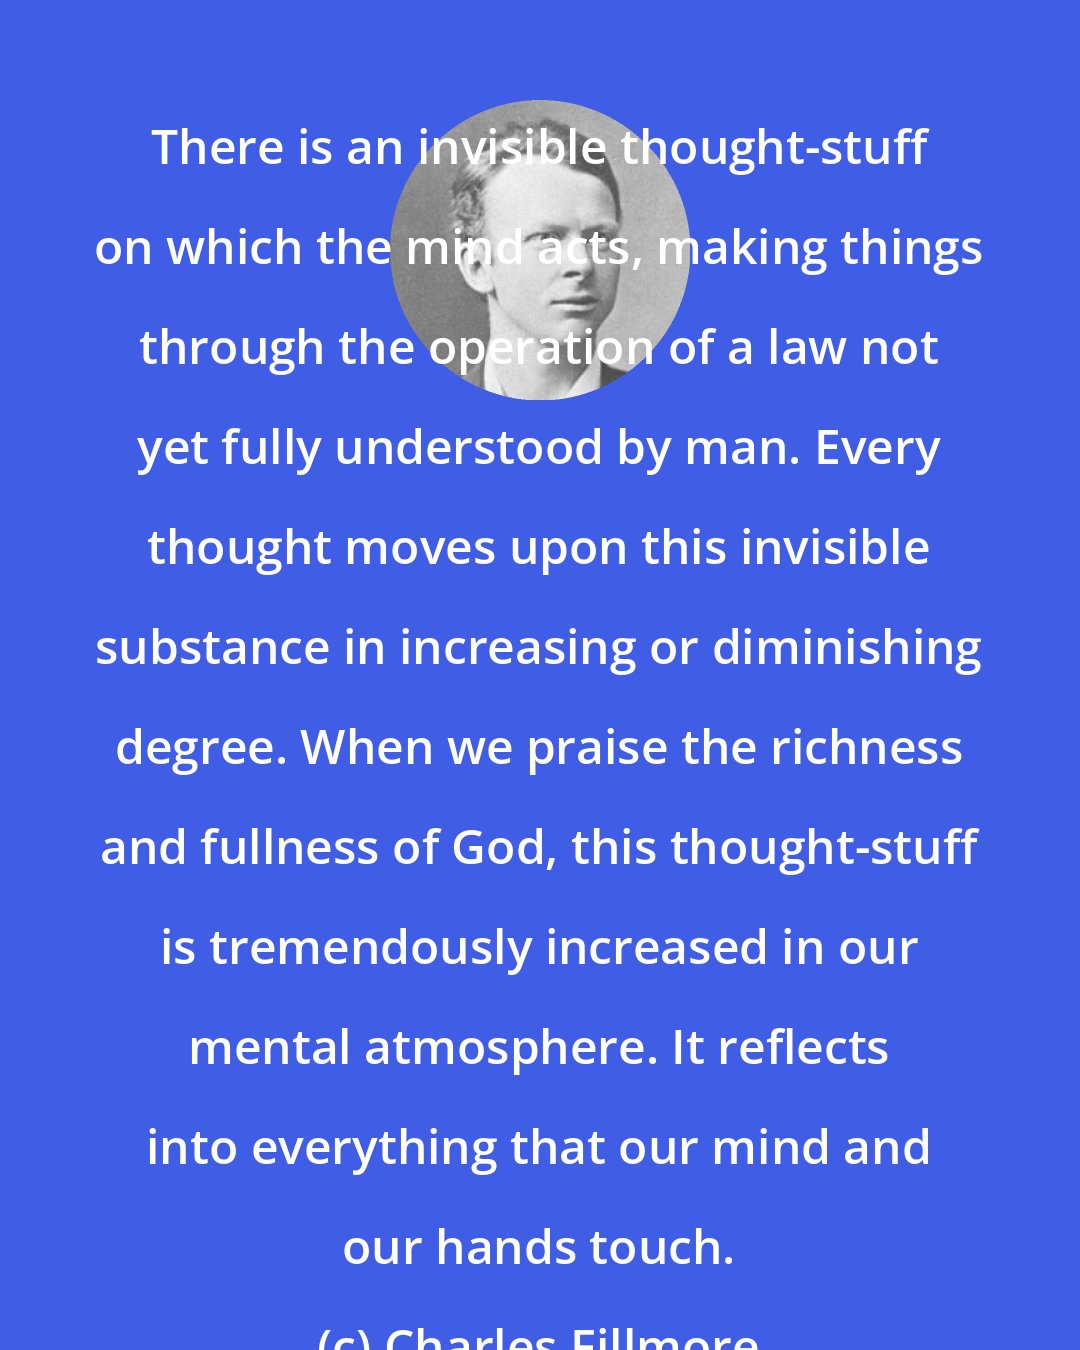 Charles Fillmore: There is an invisible thought-stuff on which the mind acts, making things through the operation of a law not yet fully understood by man. Every thought moves upon this invisible substance in increasing or diminishing degree. When we praise the richness and fullness of God, this thought-stuff is tremendously increased in our mental atmosphere. It reflects into everything that our mind and our hands touch.